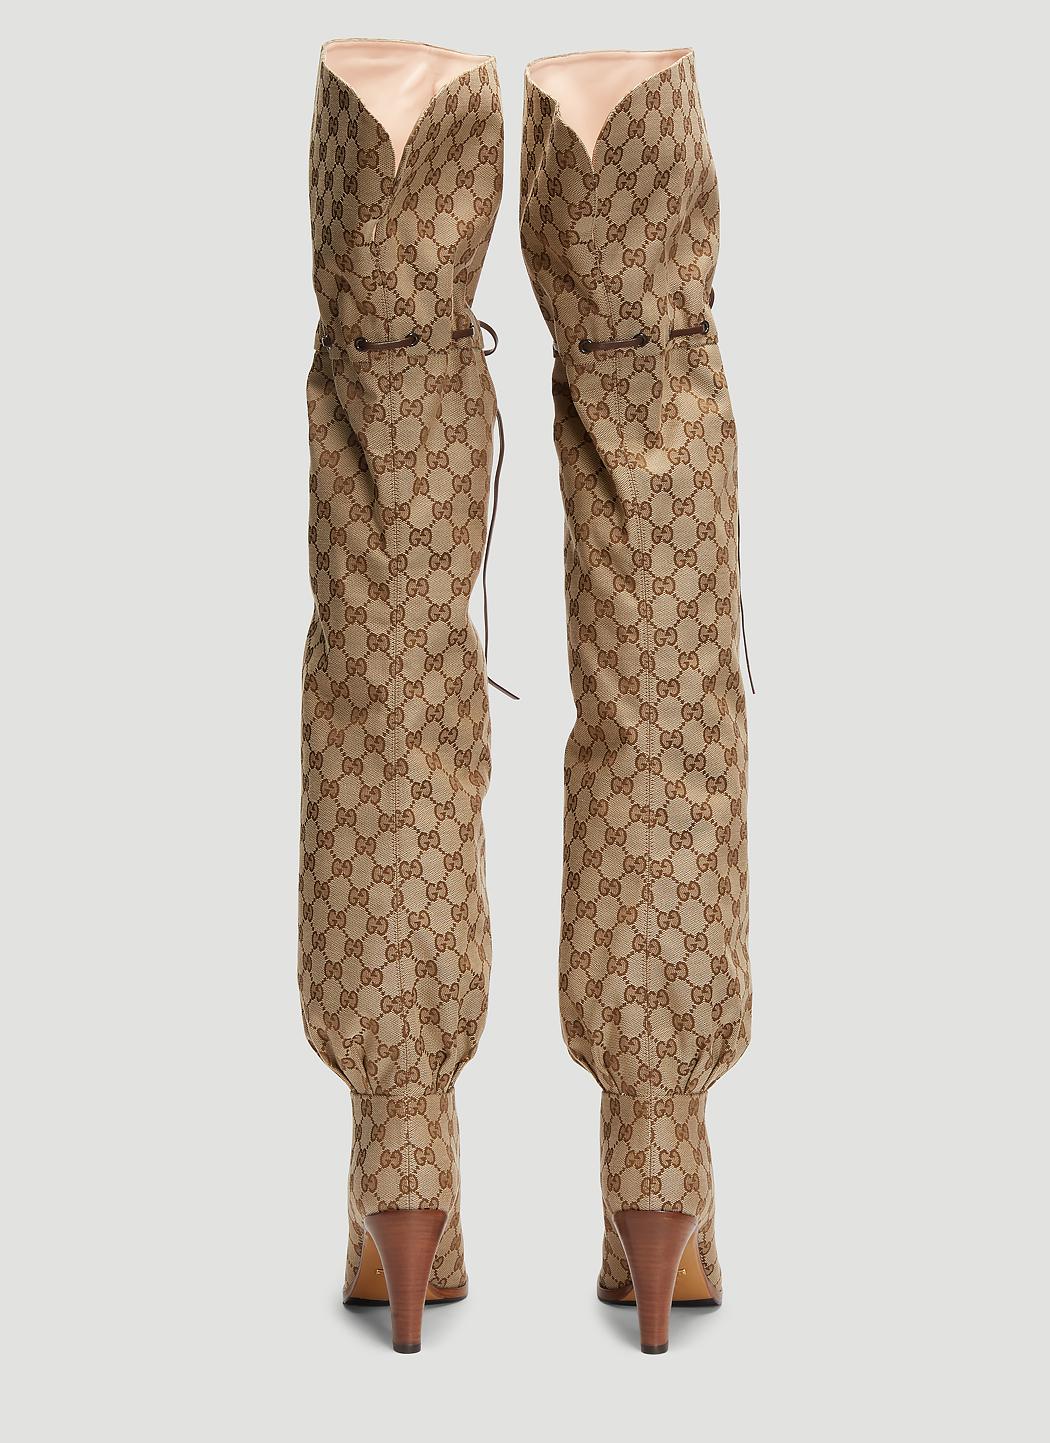 Gucci Original GG Canvas Over-the-knee Boot in Natural | Lyst